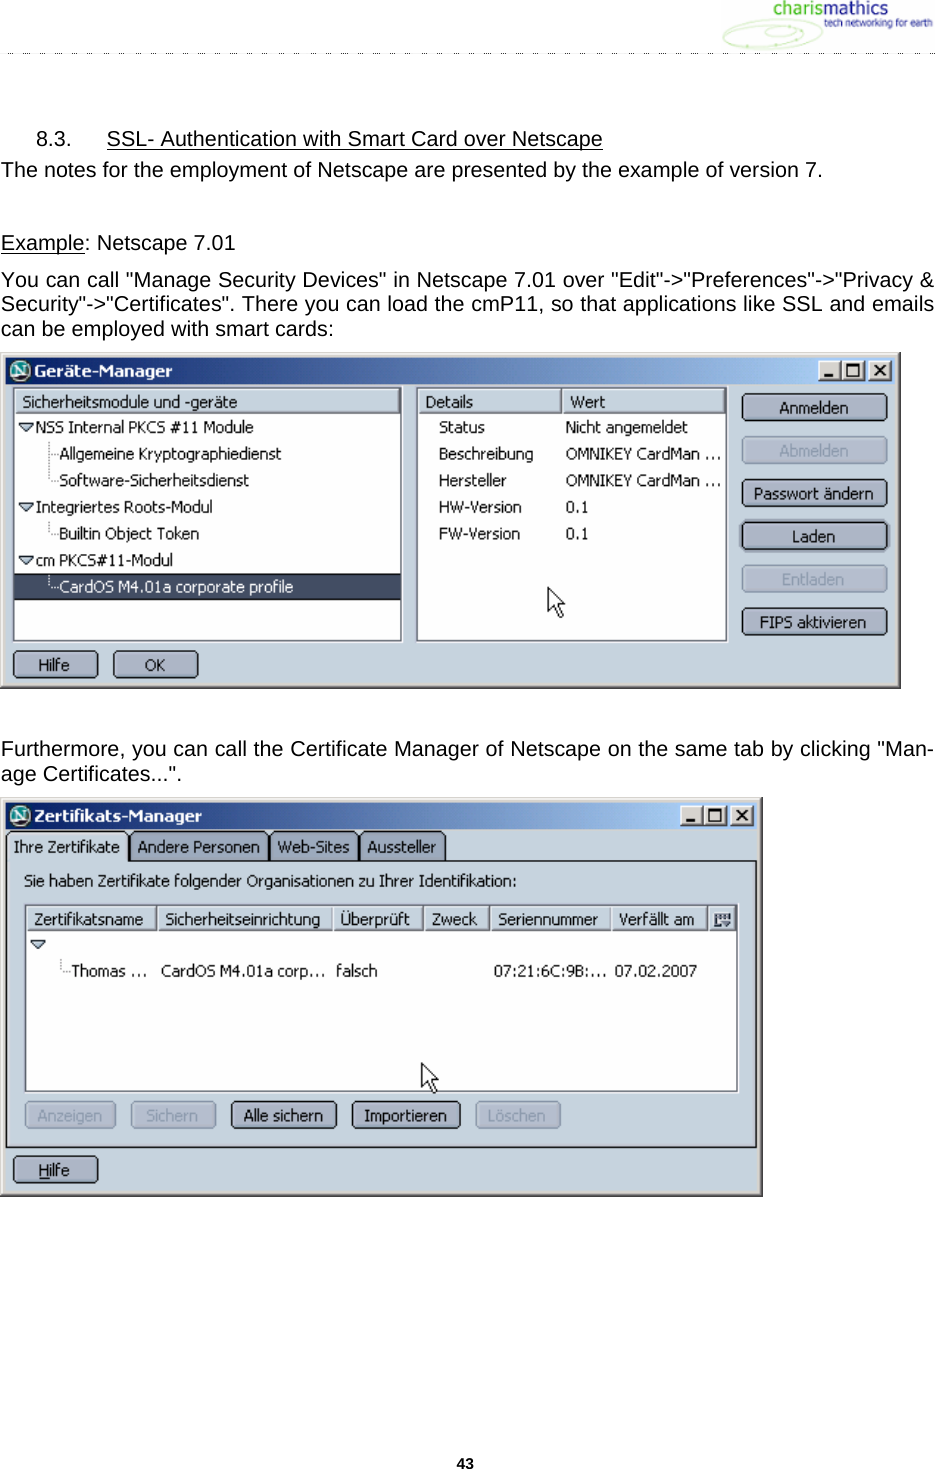     438.3.  SSL- Authentication with Smart Card over Netscape The notes for the employment of Netscape are presented by the example of version 7.  Example: Netscape 7.01 You can call &quot;Manage Security Devices&quot; in Netscape 7.01 over &quot;Edit&quot;-&gt;&quot;Preferences&quot;-&gt;&quot;Privacy &amp; Security&quot;-&gt;&quot;Certificates&quot;. There you can load the cmP11, so that applications like SSL and emails can be employed with smart cards:   Furthermore, you can call the Certificate Manager of Netscape on the same tab by clicking &quot;Man-age Certificates...&quot;.    